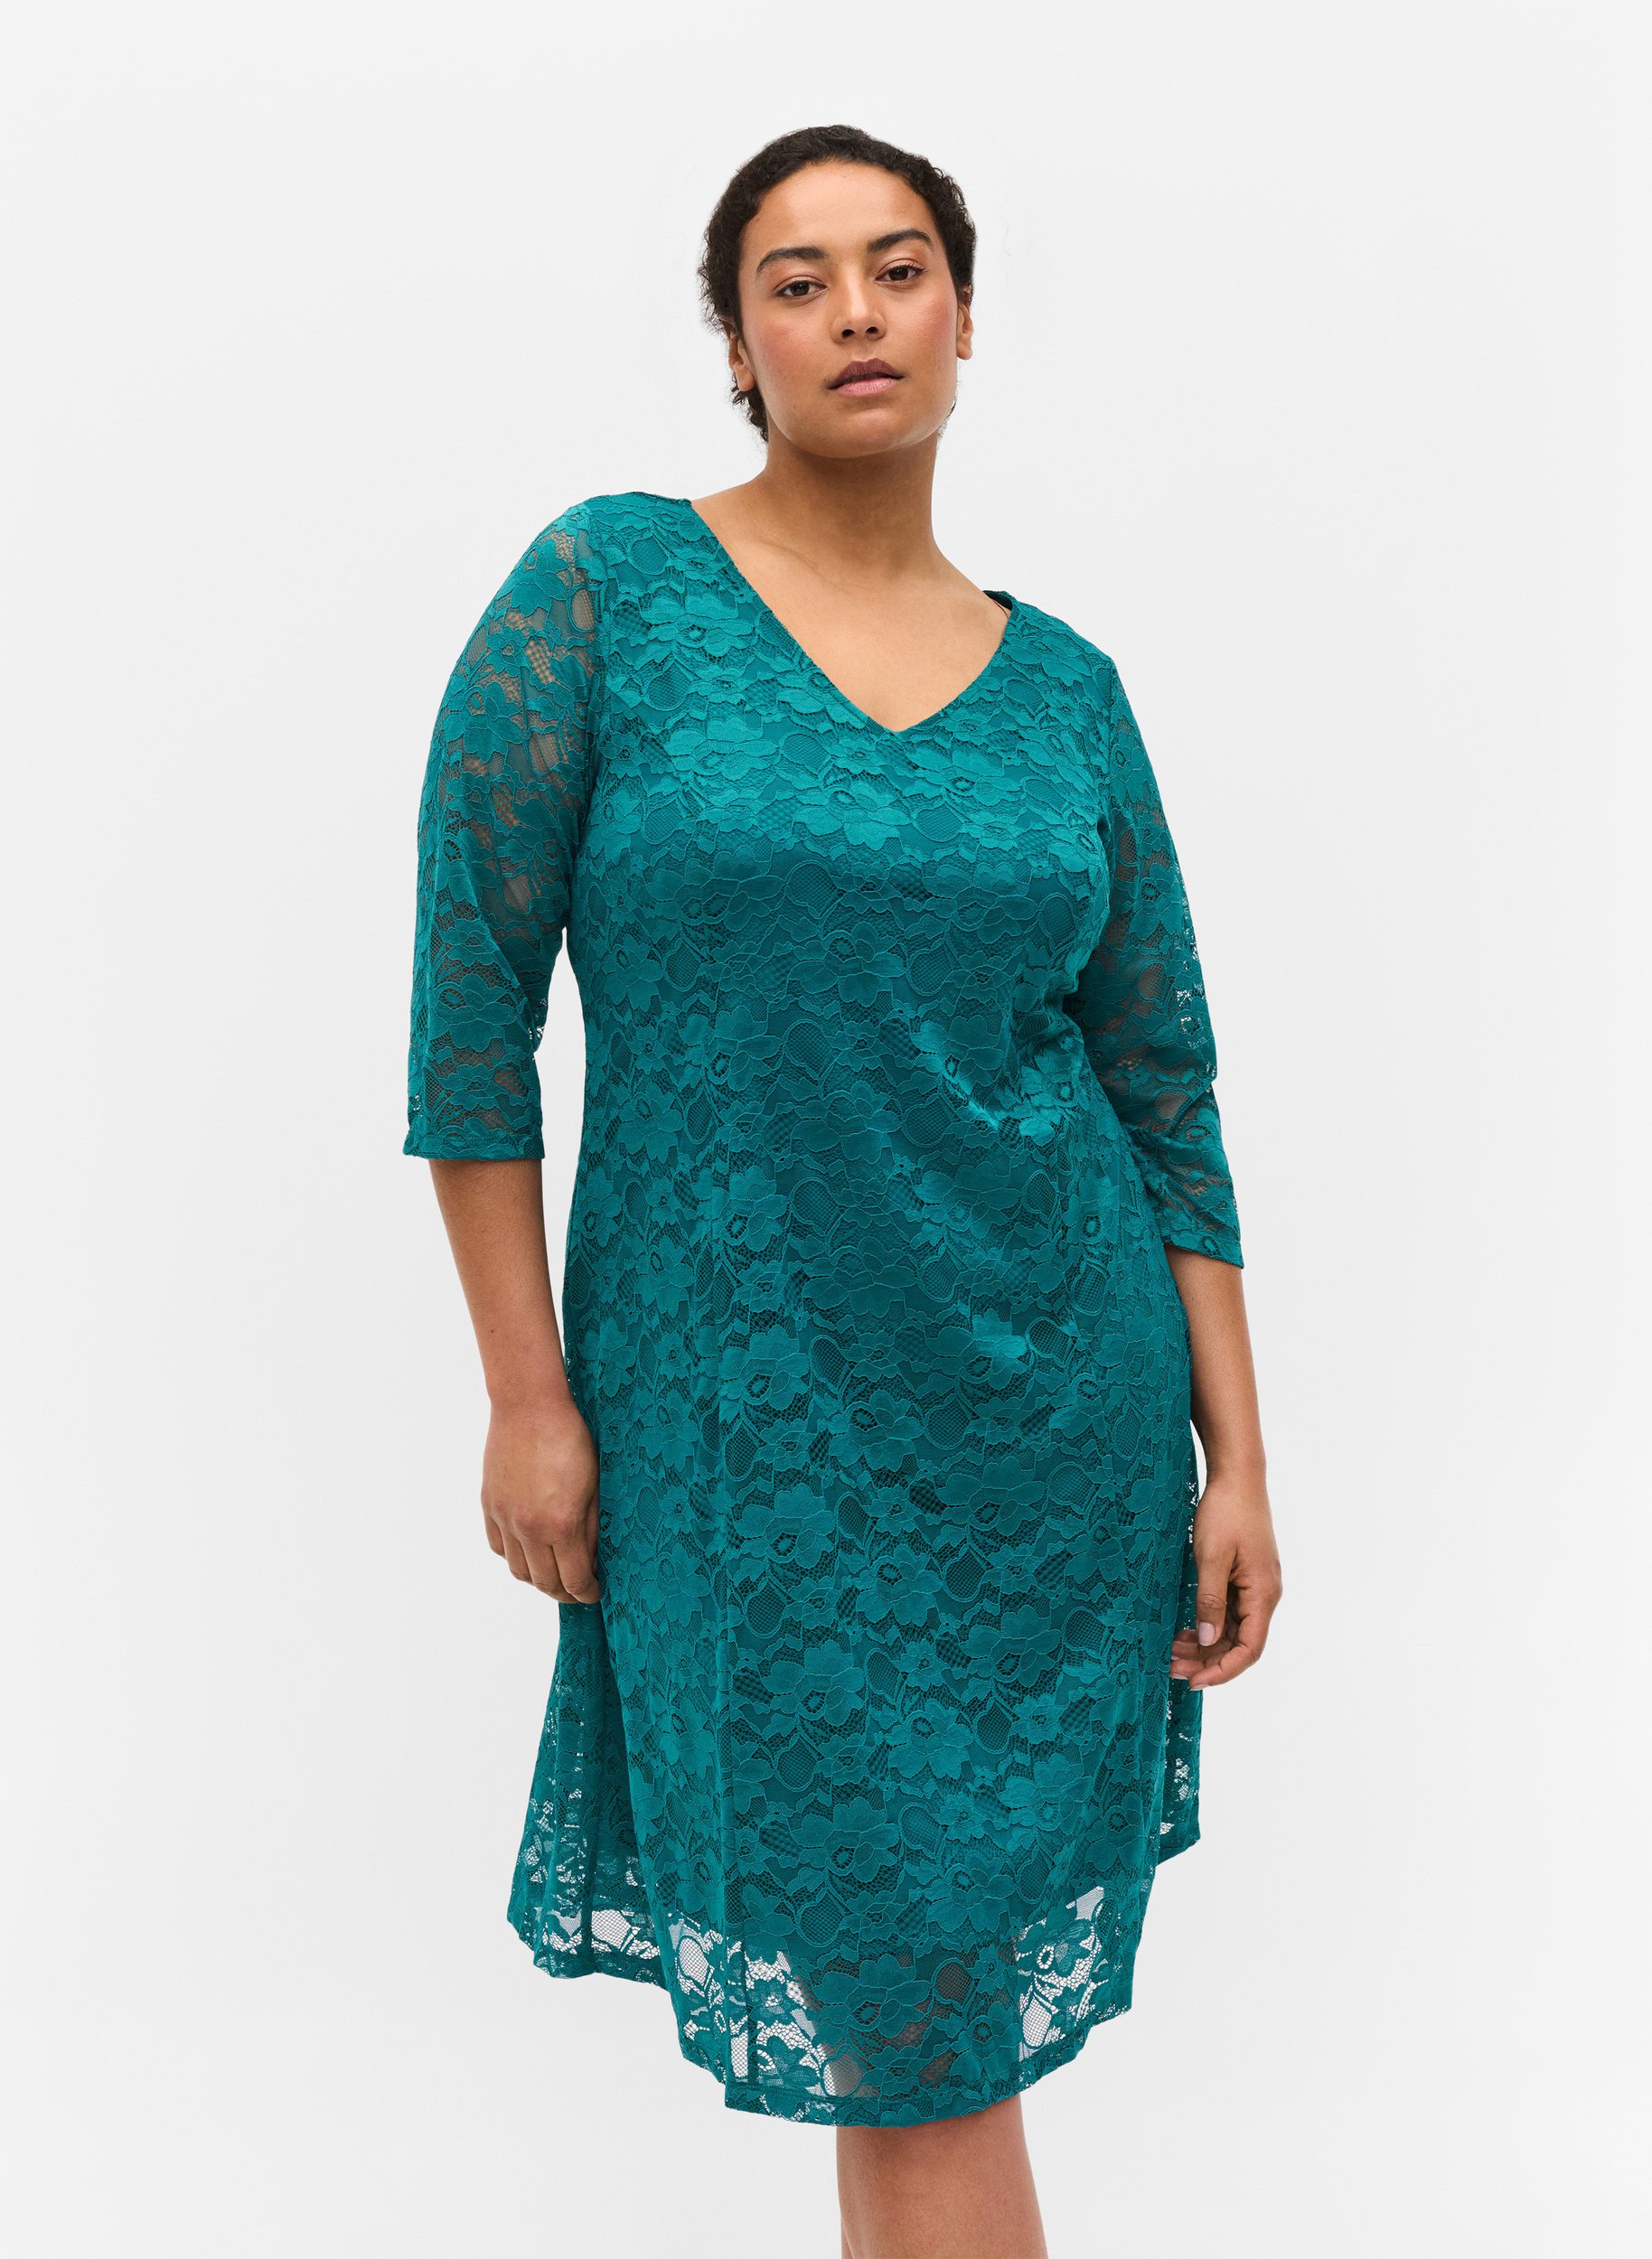 Lace dress with 3/4 sleeves, Quetzal Green, Model